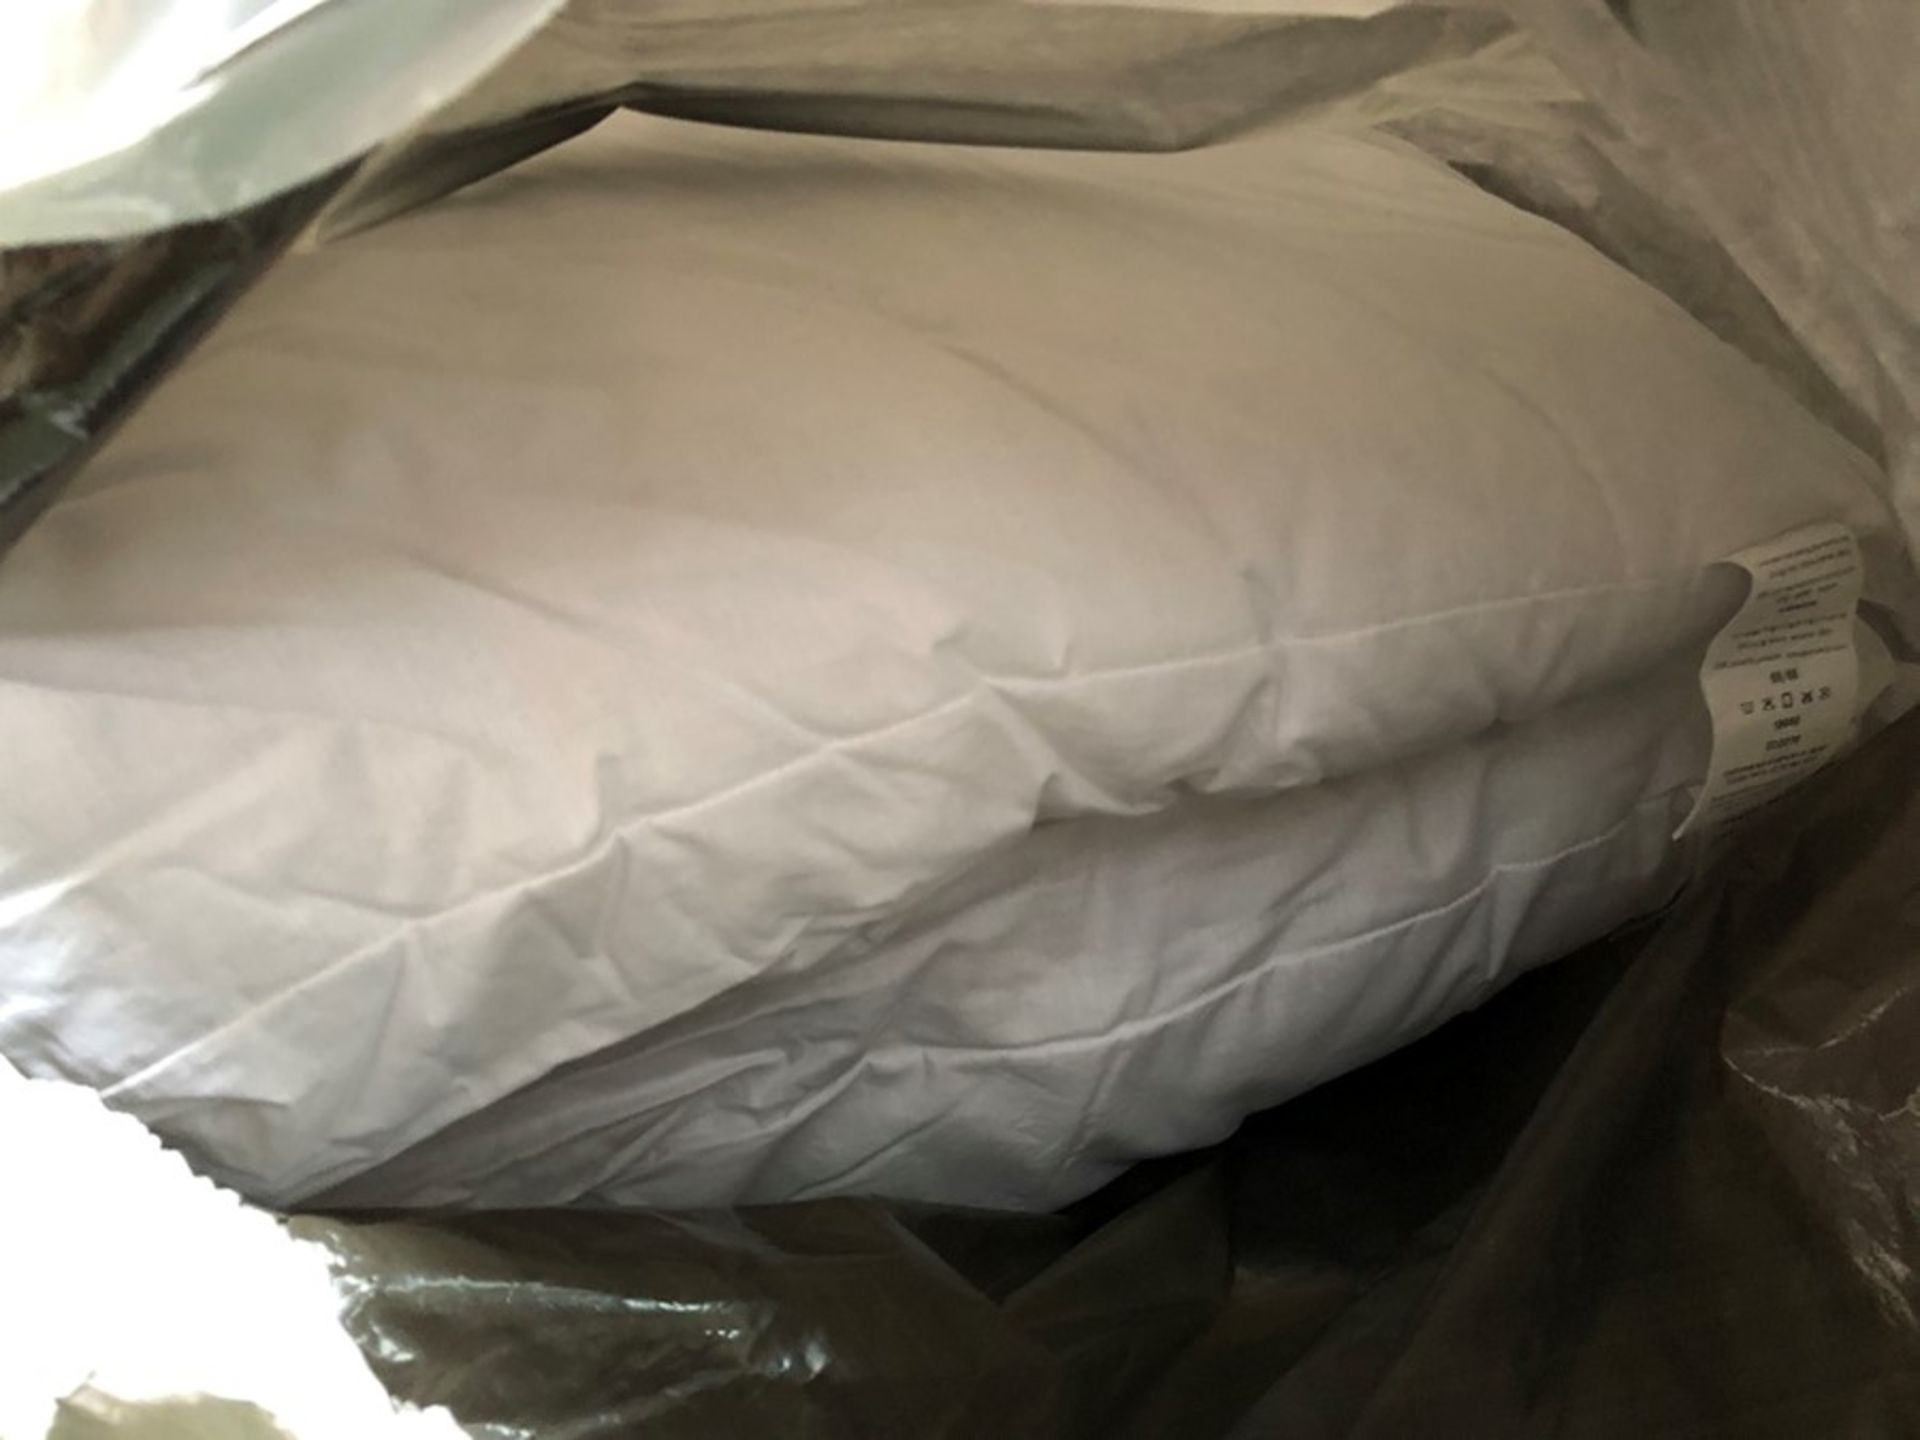 1 LOT TO TO CONTAIN 2 BAGGED HIGH QUALITY PILLOWS - WHITE (SOLD AS SEEN)